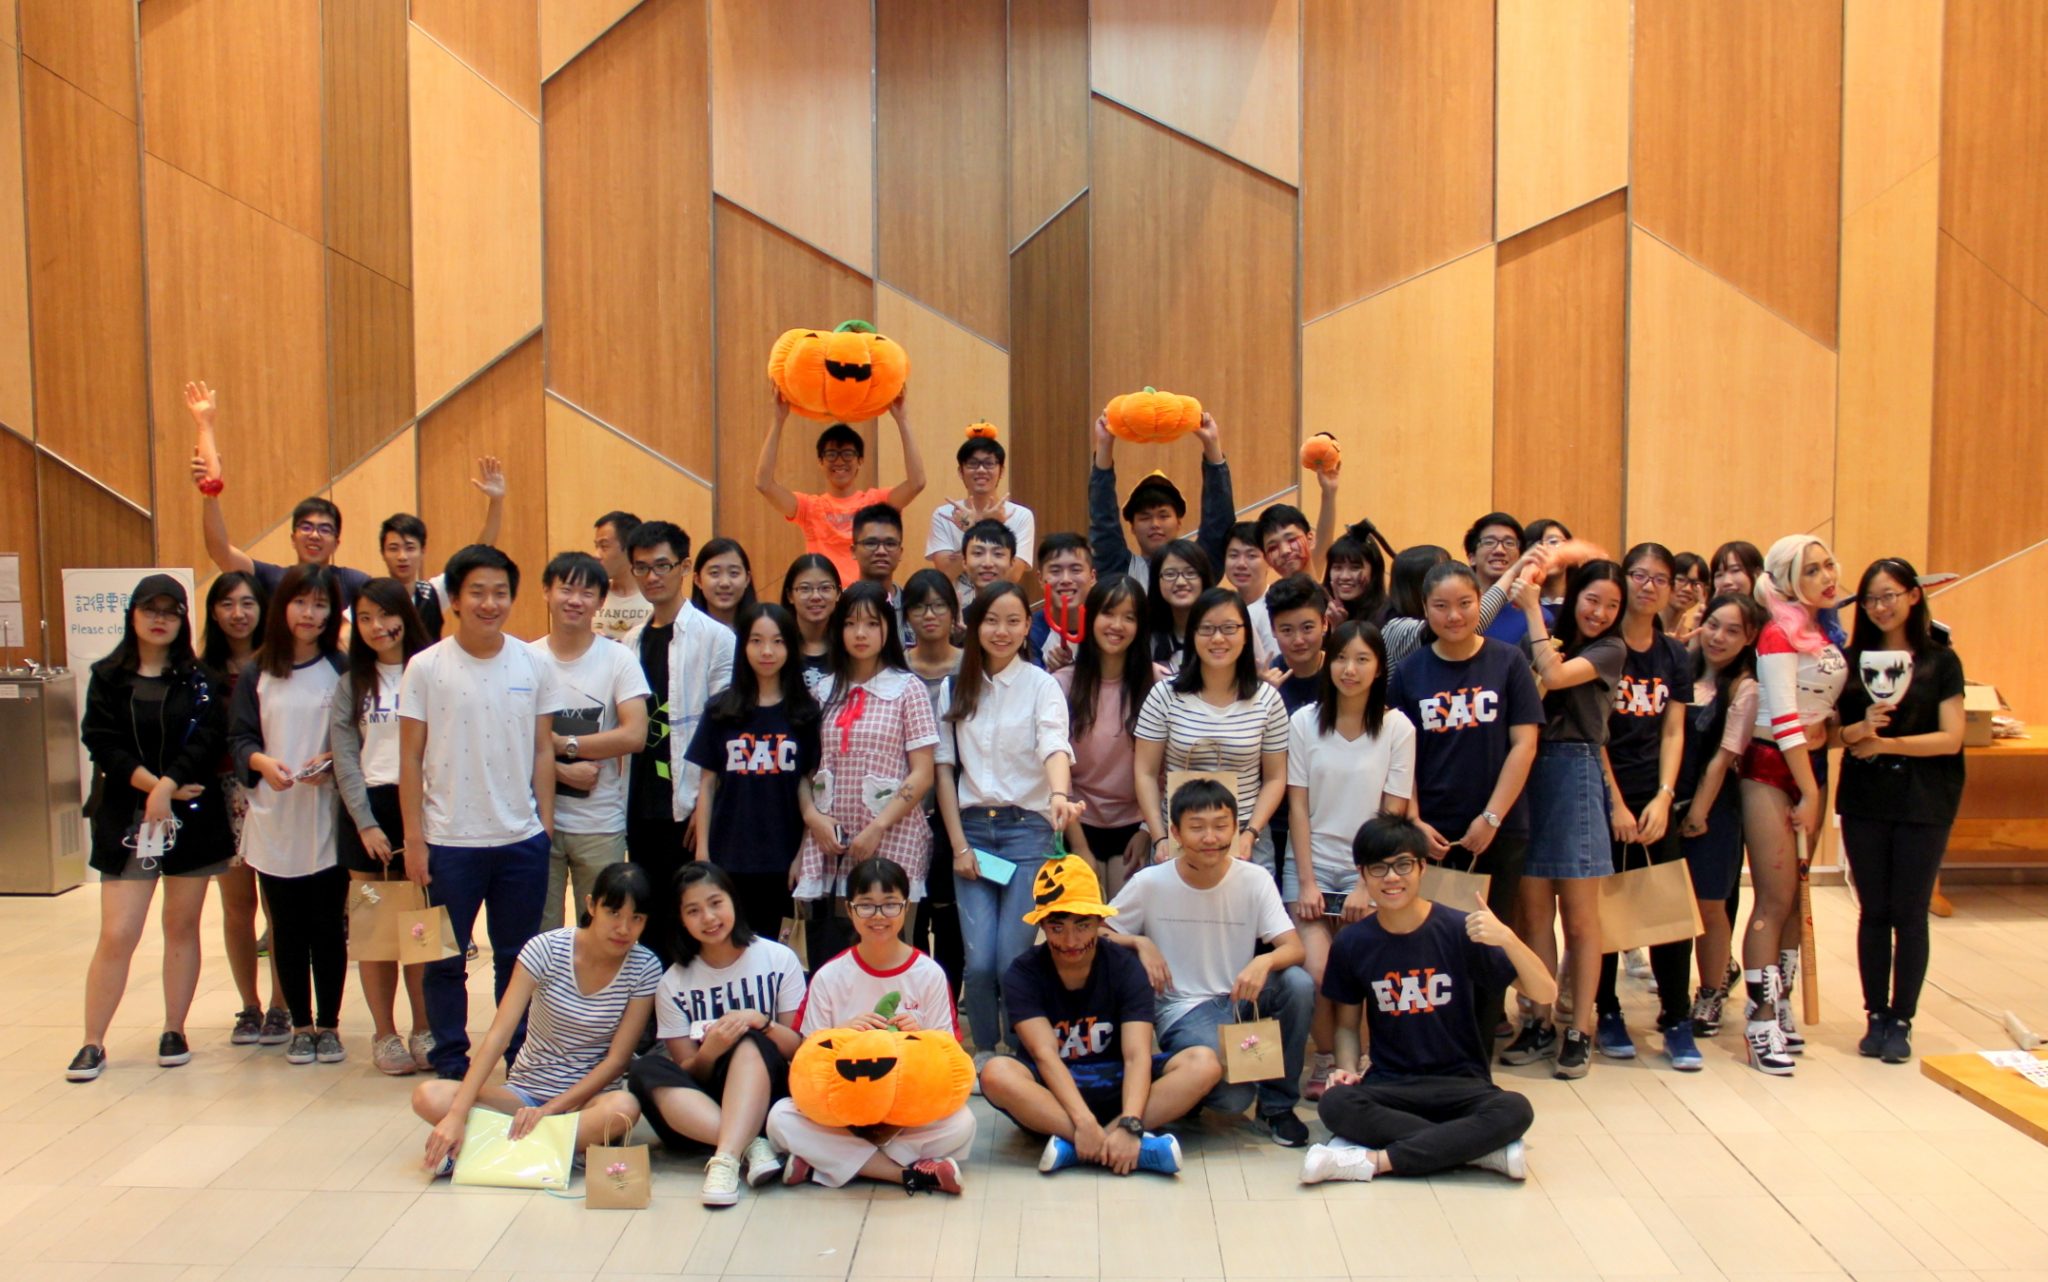 Group photo of House Association members and some event participants. 活動工作人員與部分參與者大合照。 